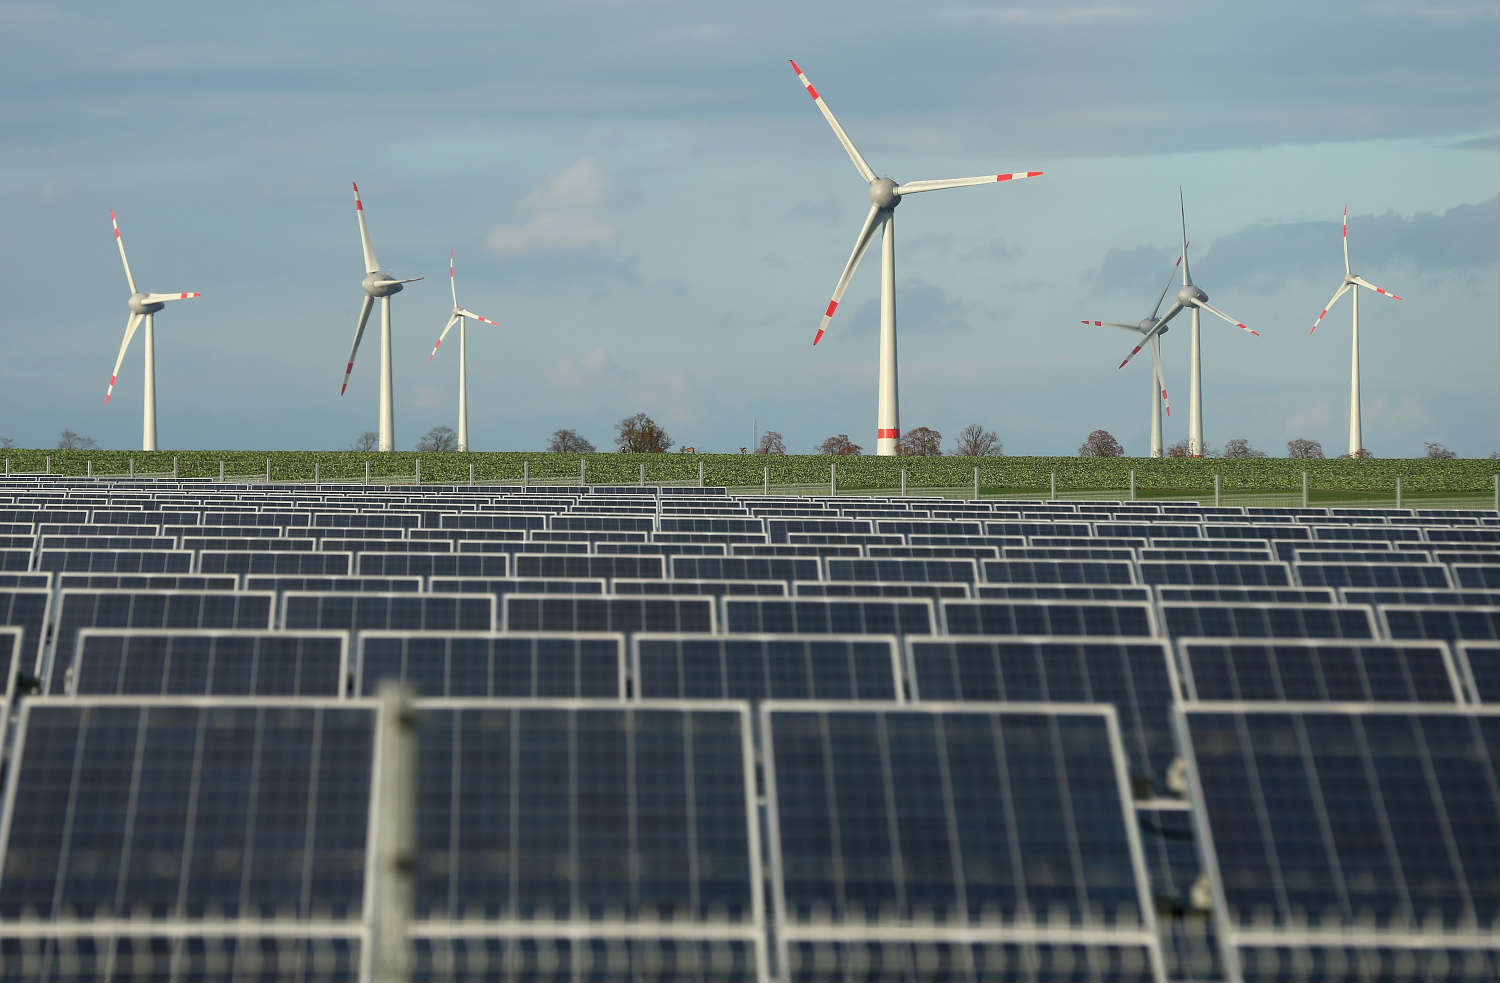 Germany has become a world leader in solar power (Photo by Sean Gallup/Getty Images)